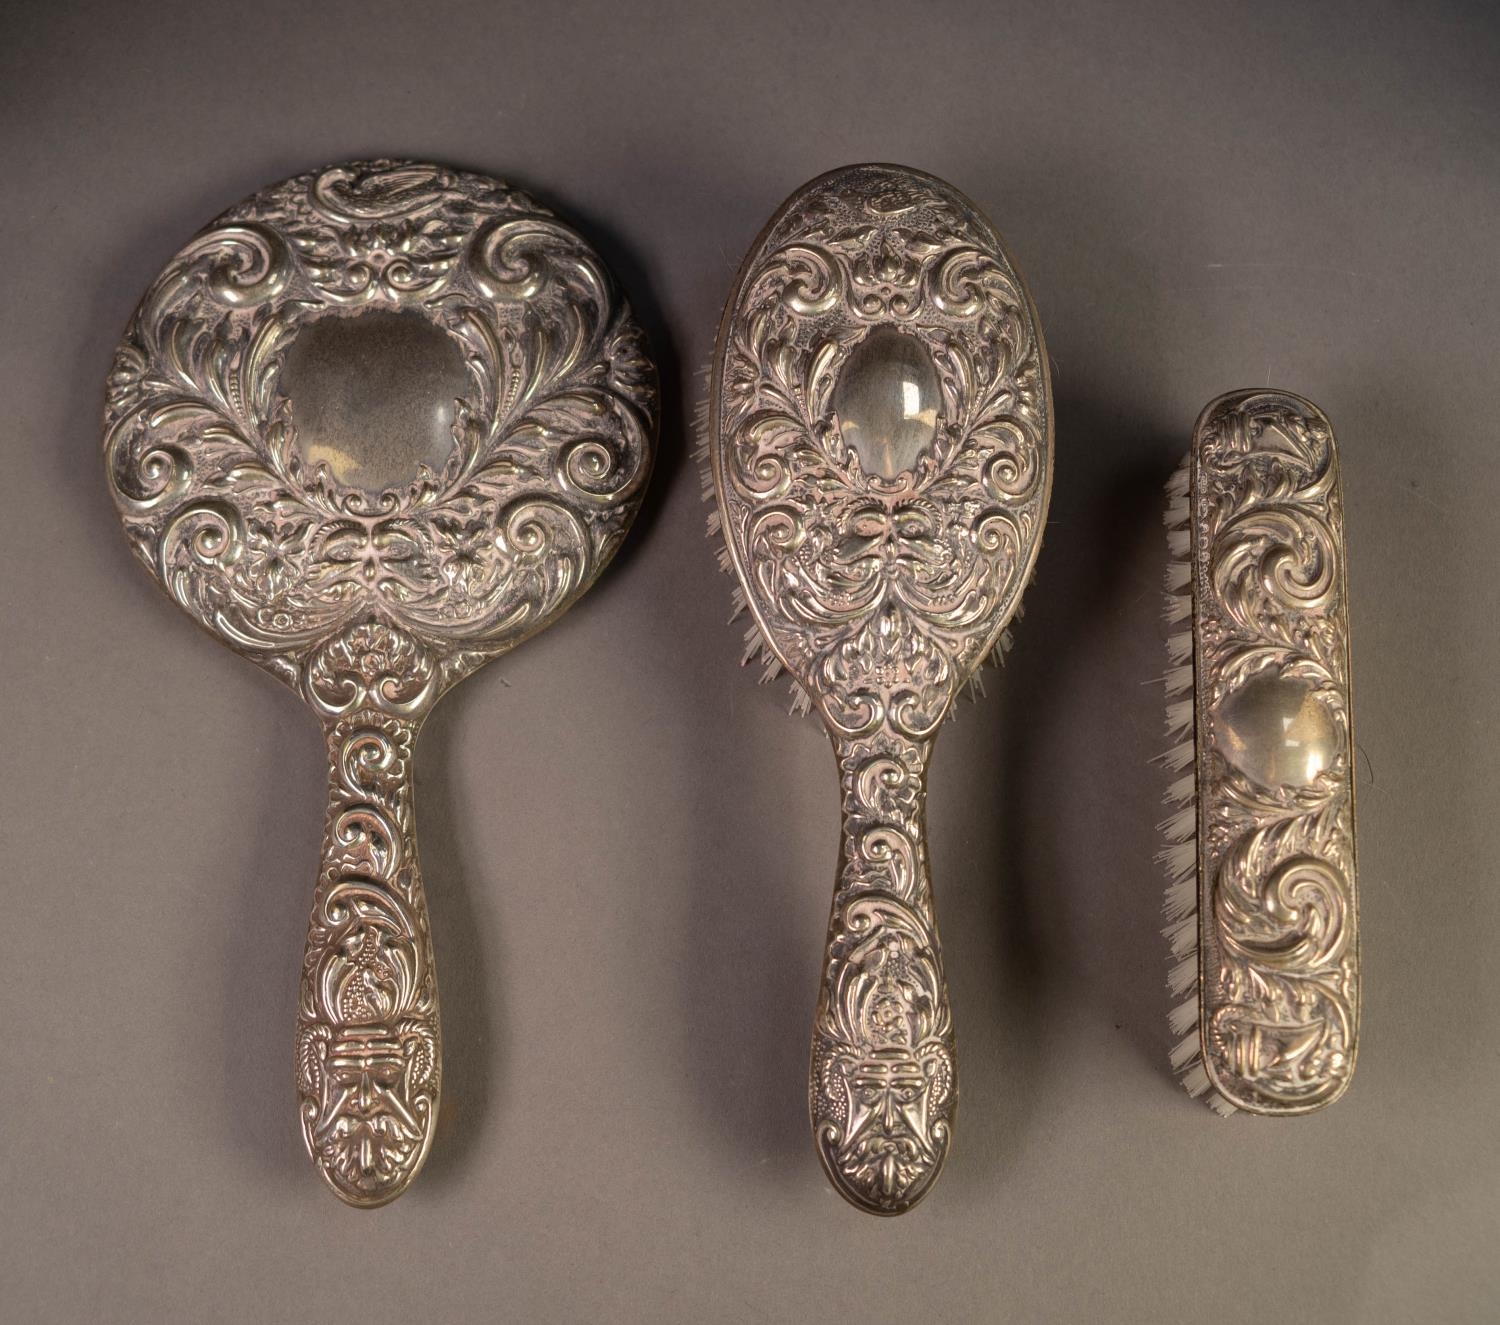 STAMPED SILVER BACKED LADY'S DRESSING TABLE SET of hand mirror, clothes brush and hair brush,